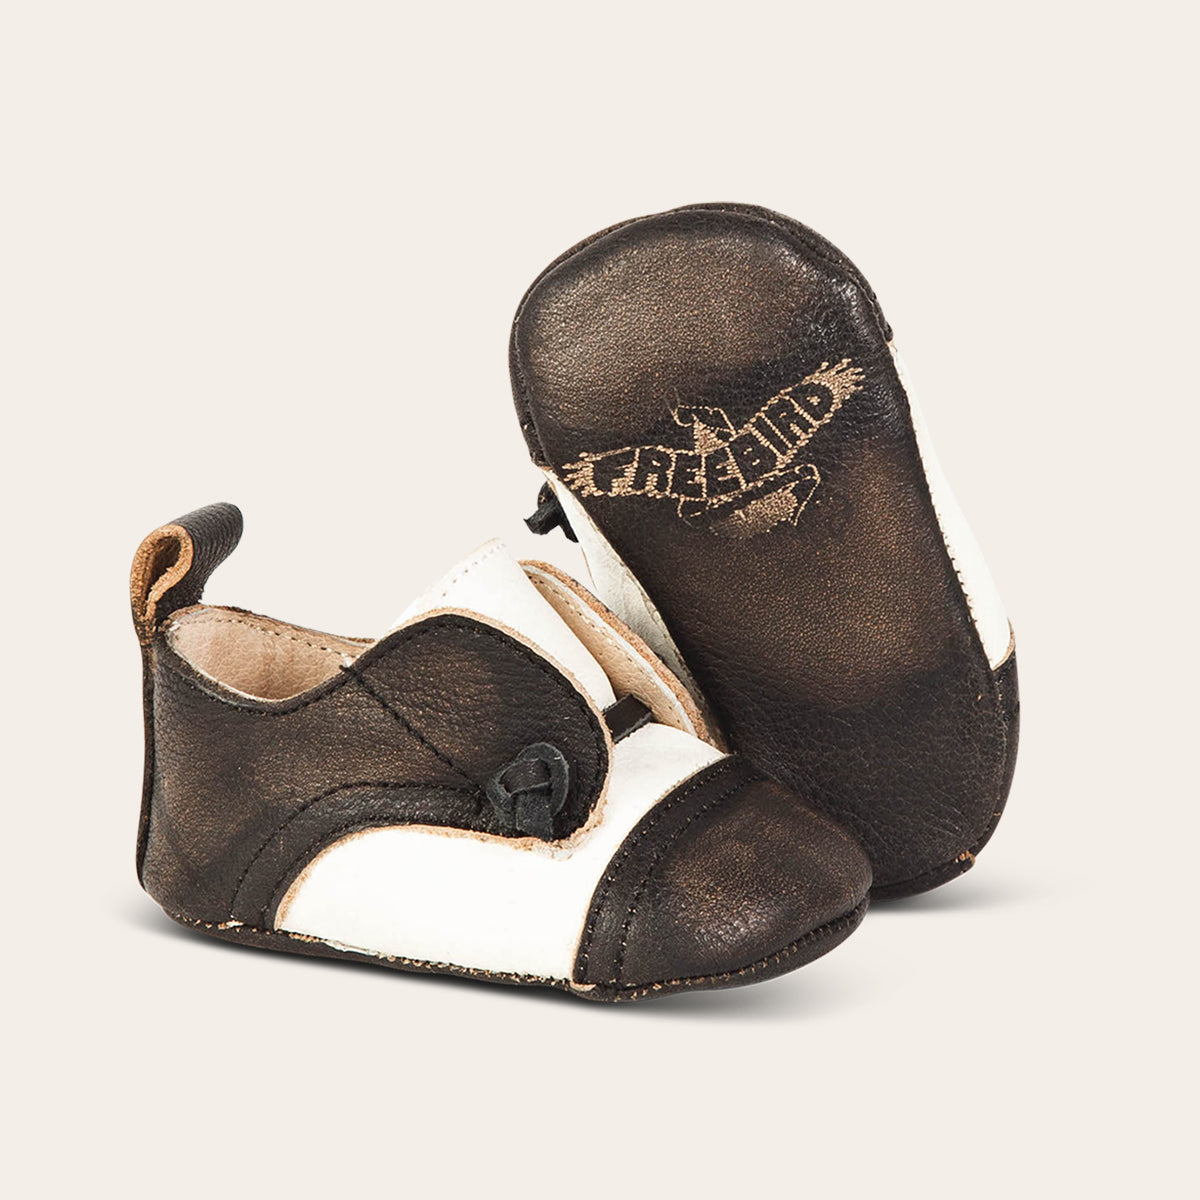 Side view showing decorative knotted leather lace and soft leather imprinted sole on FREEBIRD infant baby Mabel taupe leather shoe